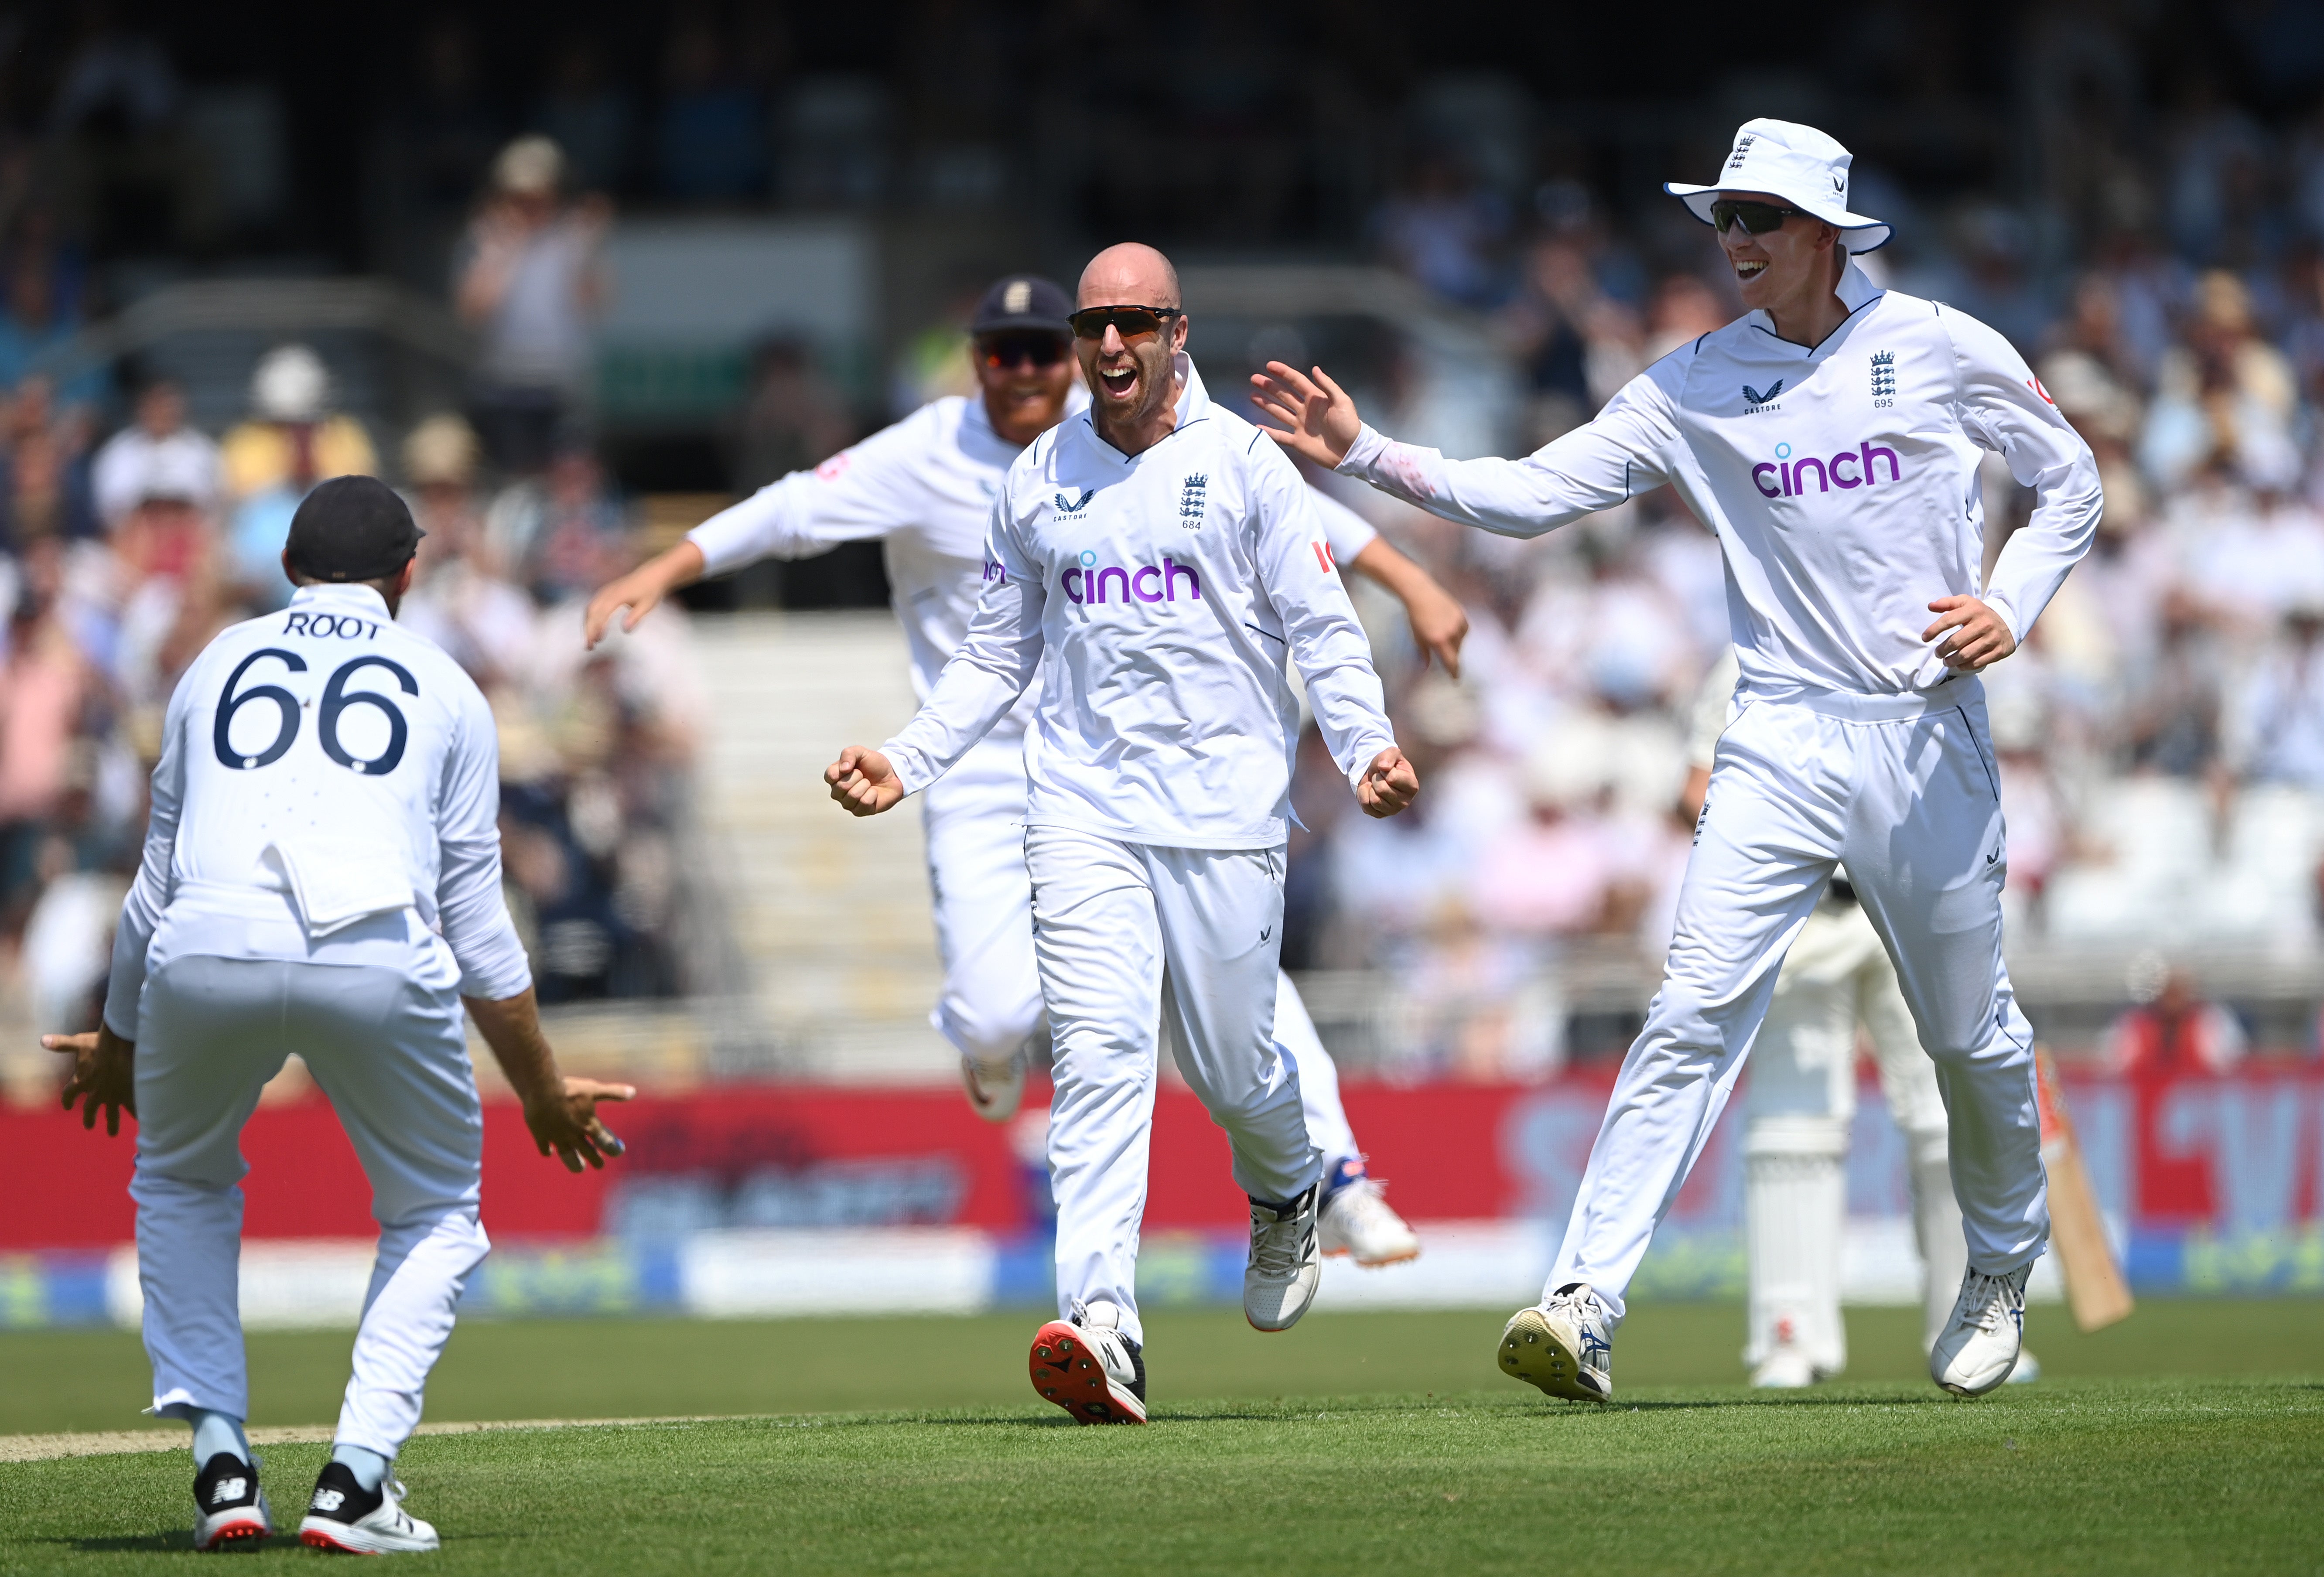 Jack Leach celebrates taking the wicket of Will Young